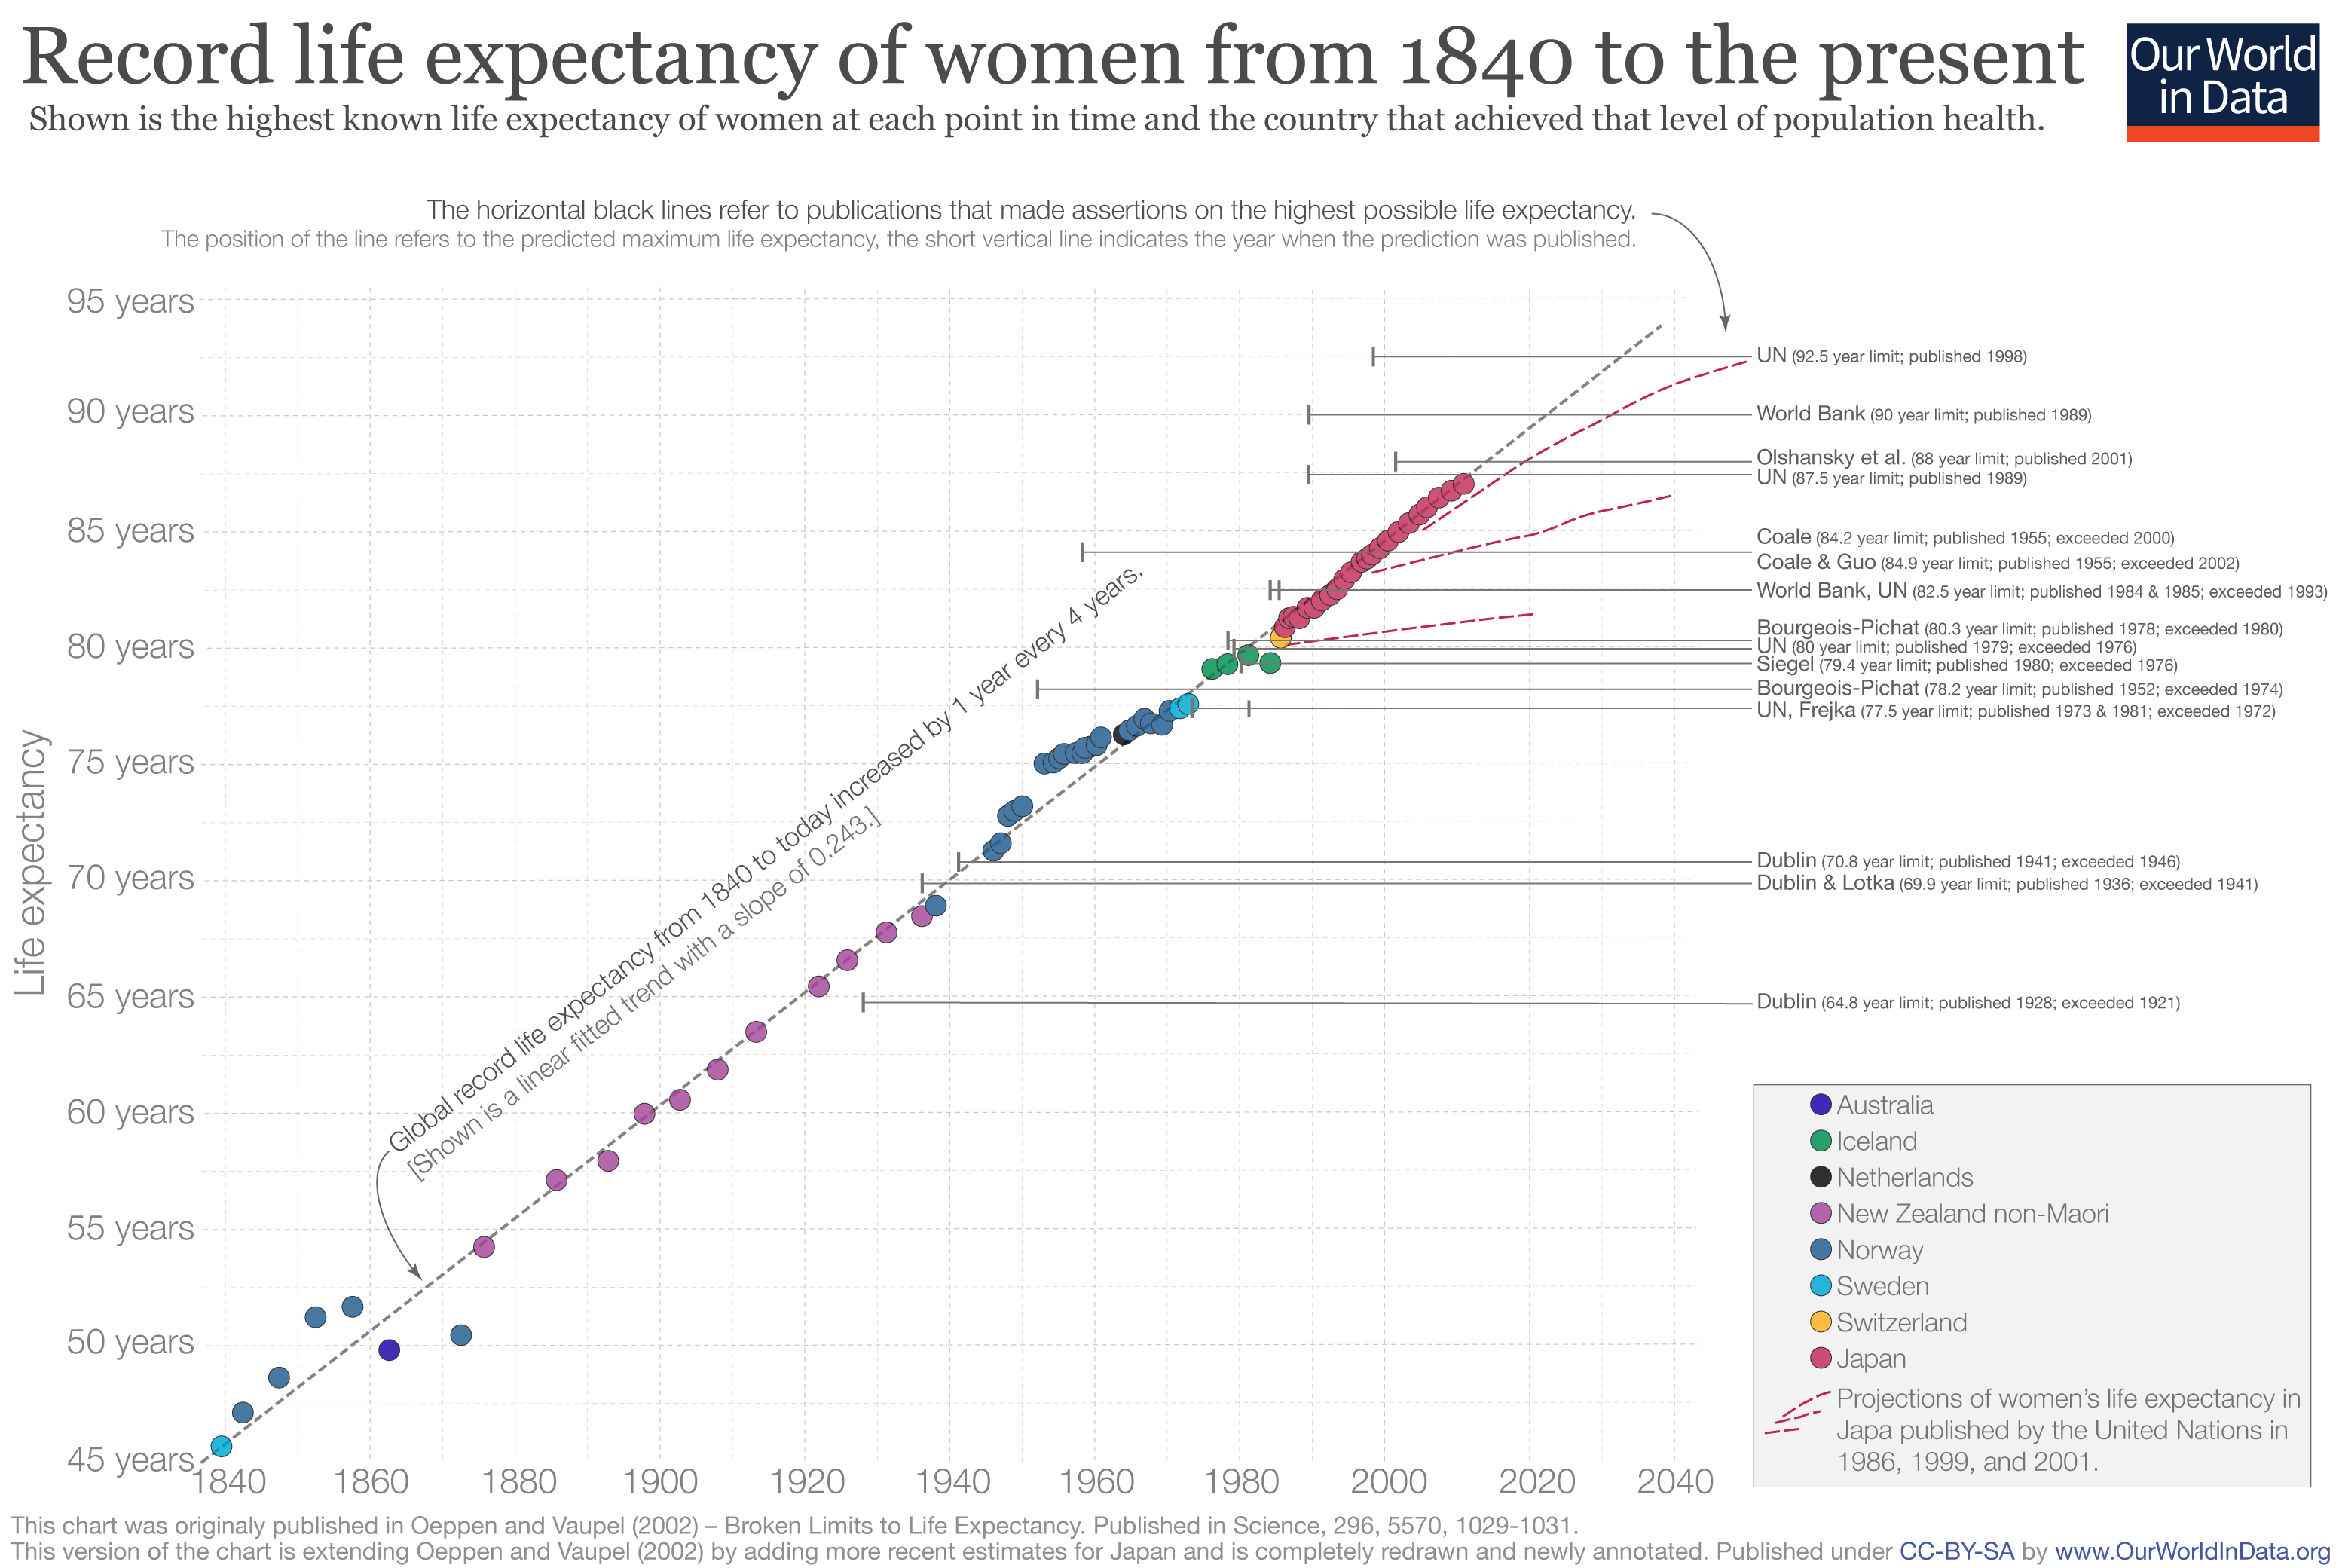 Record-female-life-expectancy-since-1840.jpg